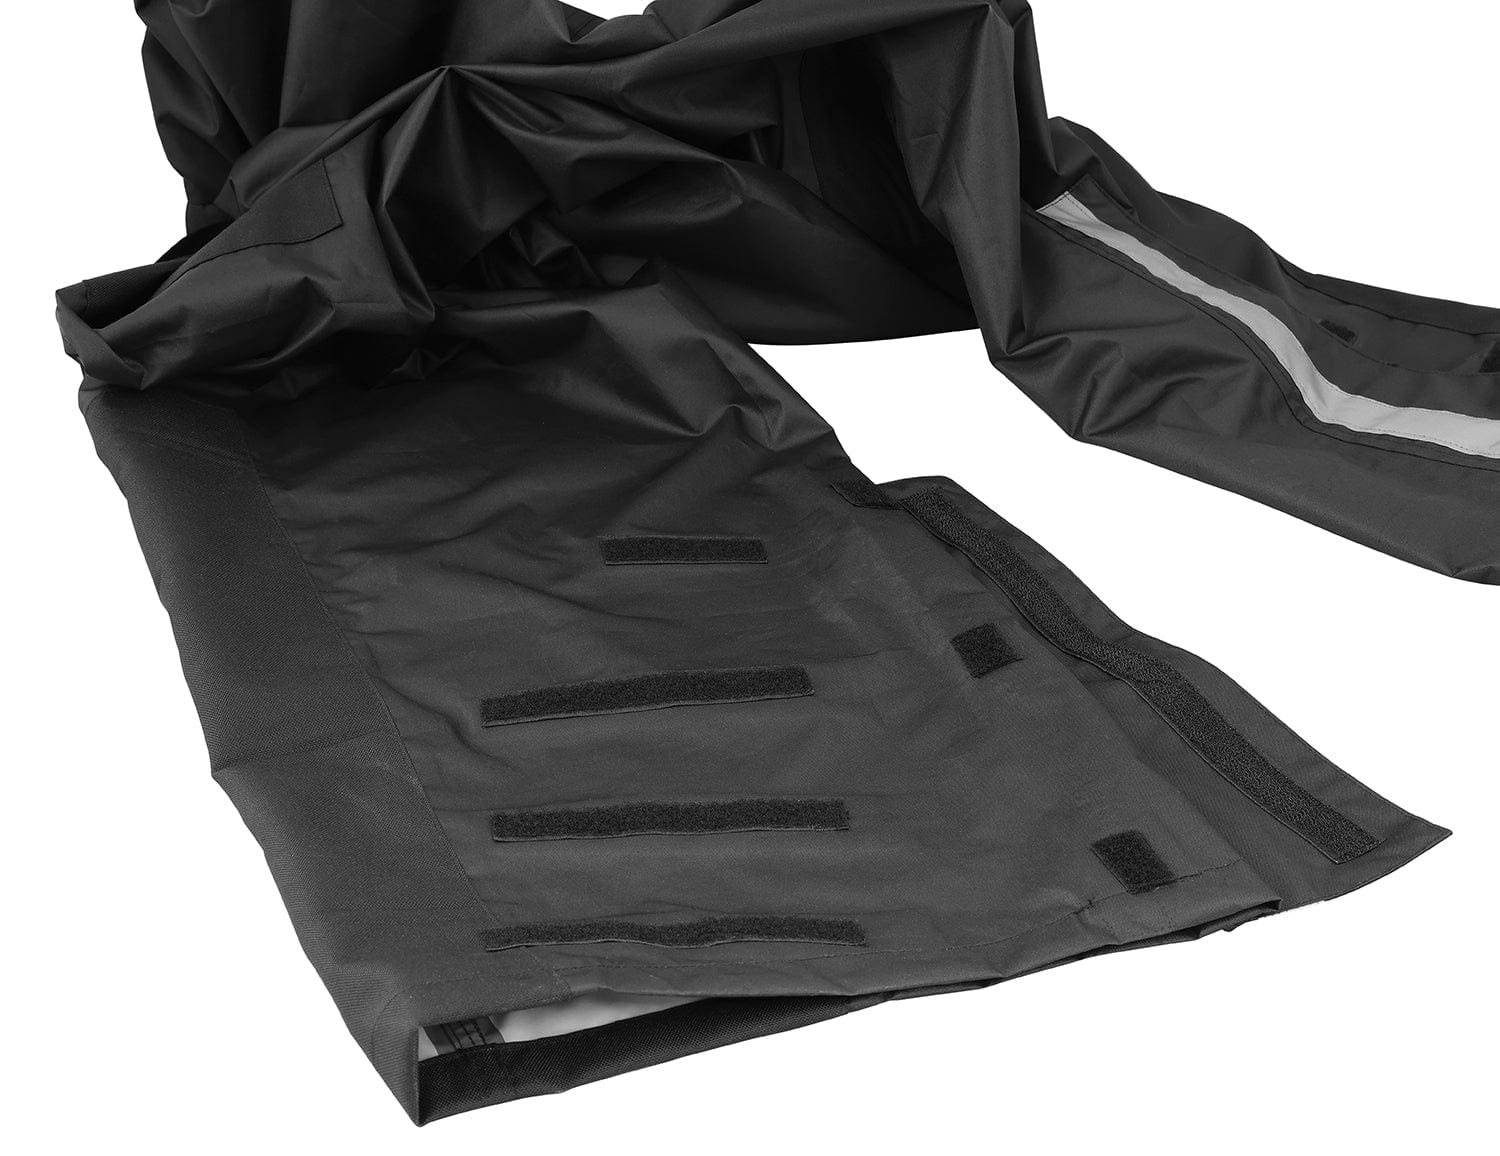 Western Powersports Pants Solo Storm Pants By Nelson-Rigg